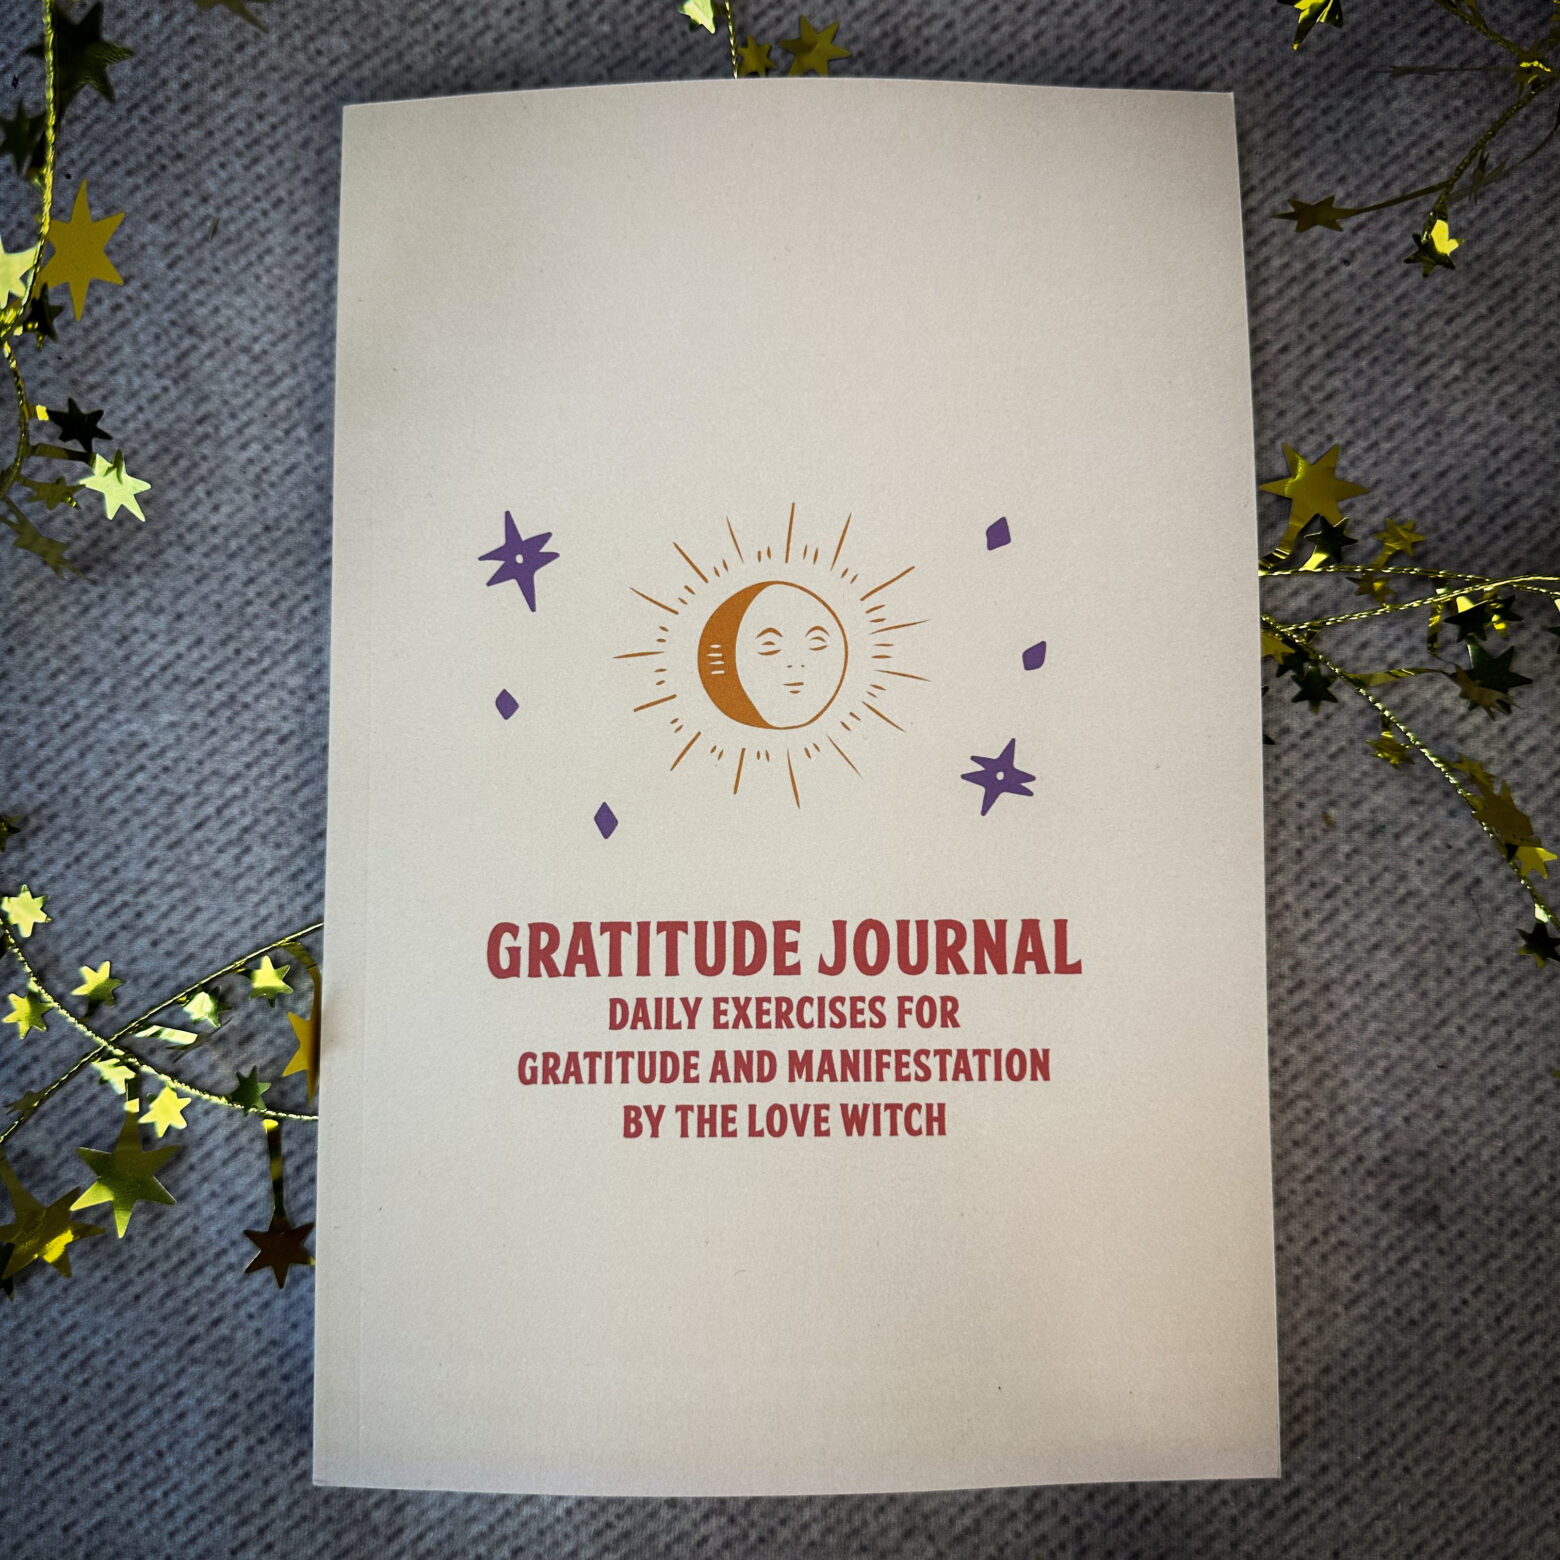 Gratitude Journal by The Love Witch